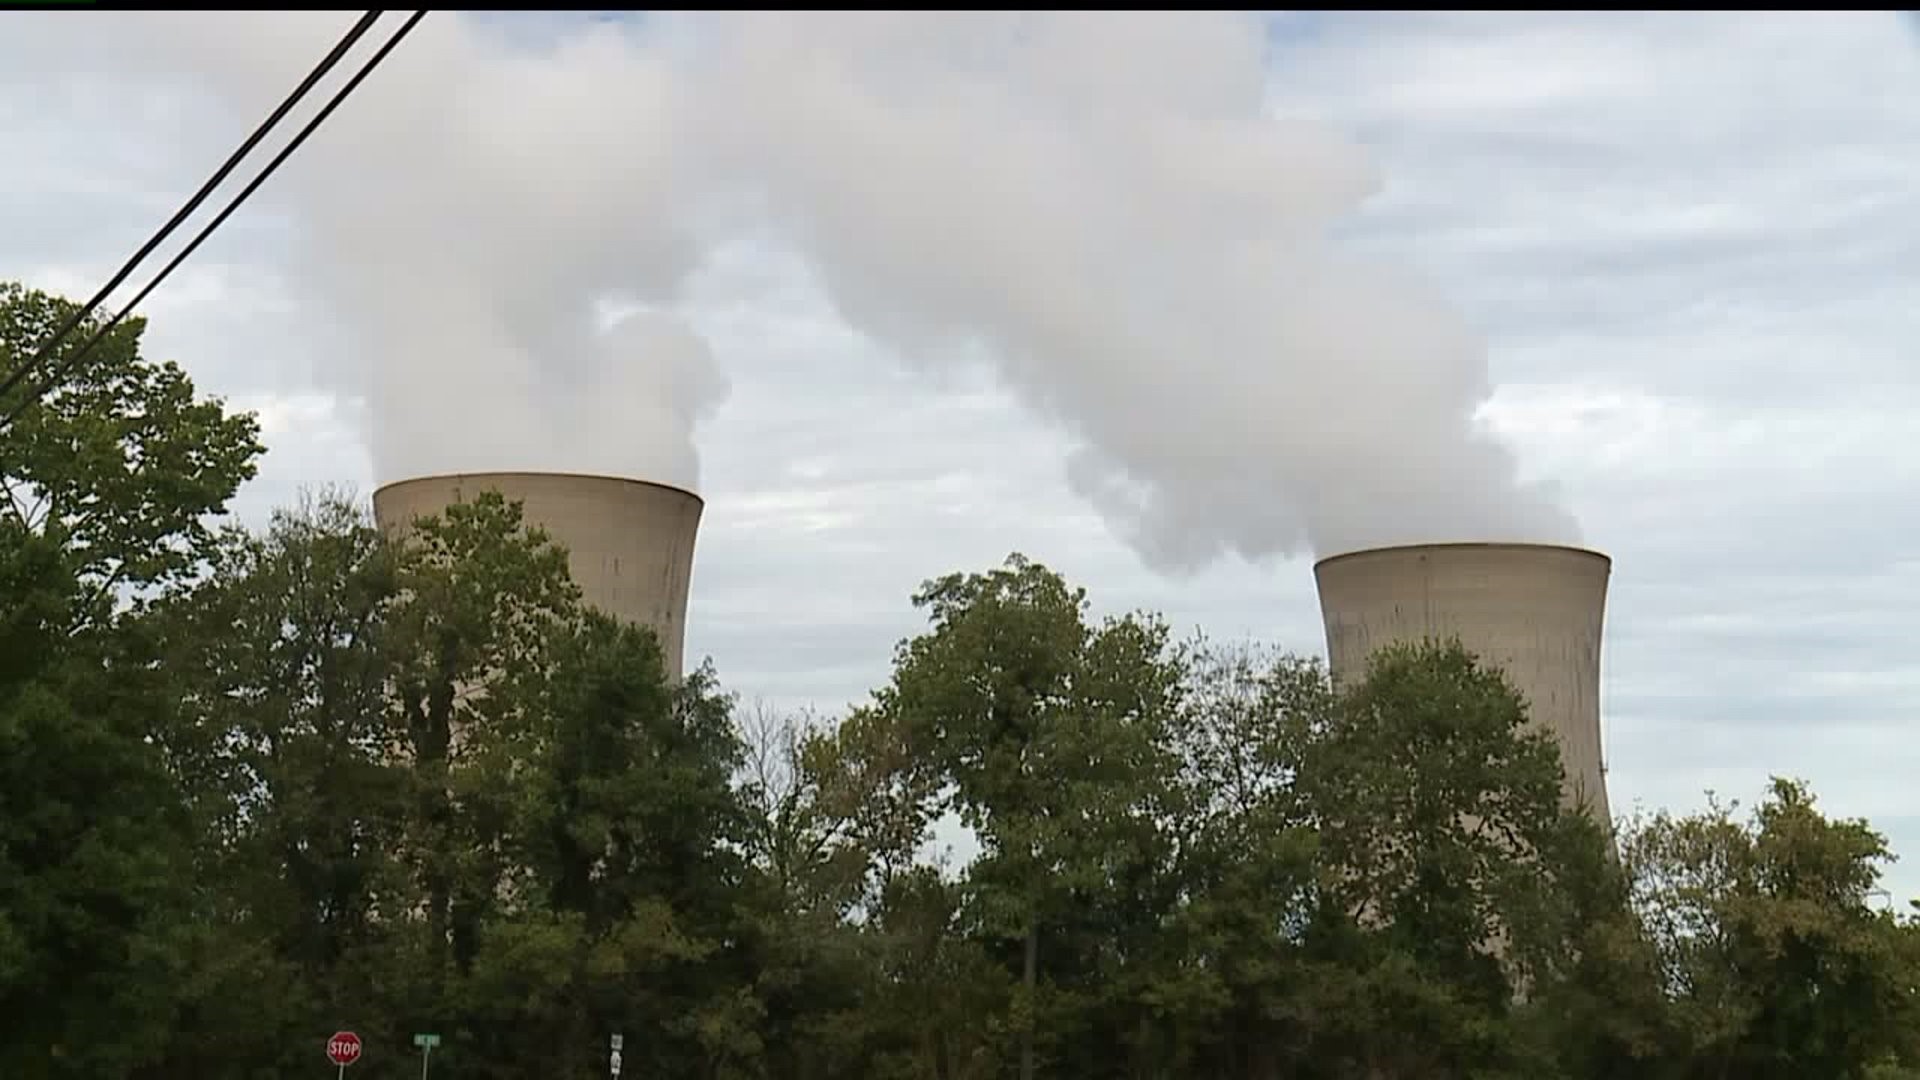 Helping Communities Impacted by Power Plant Shutdown